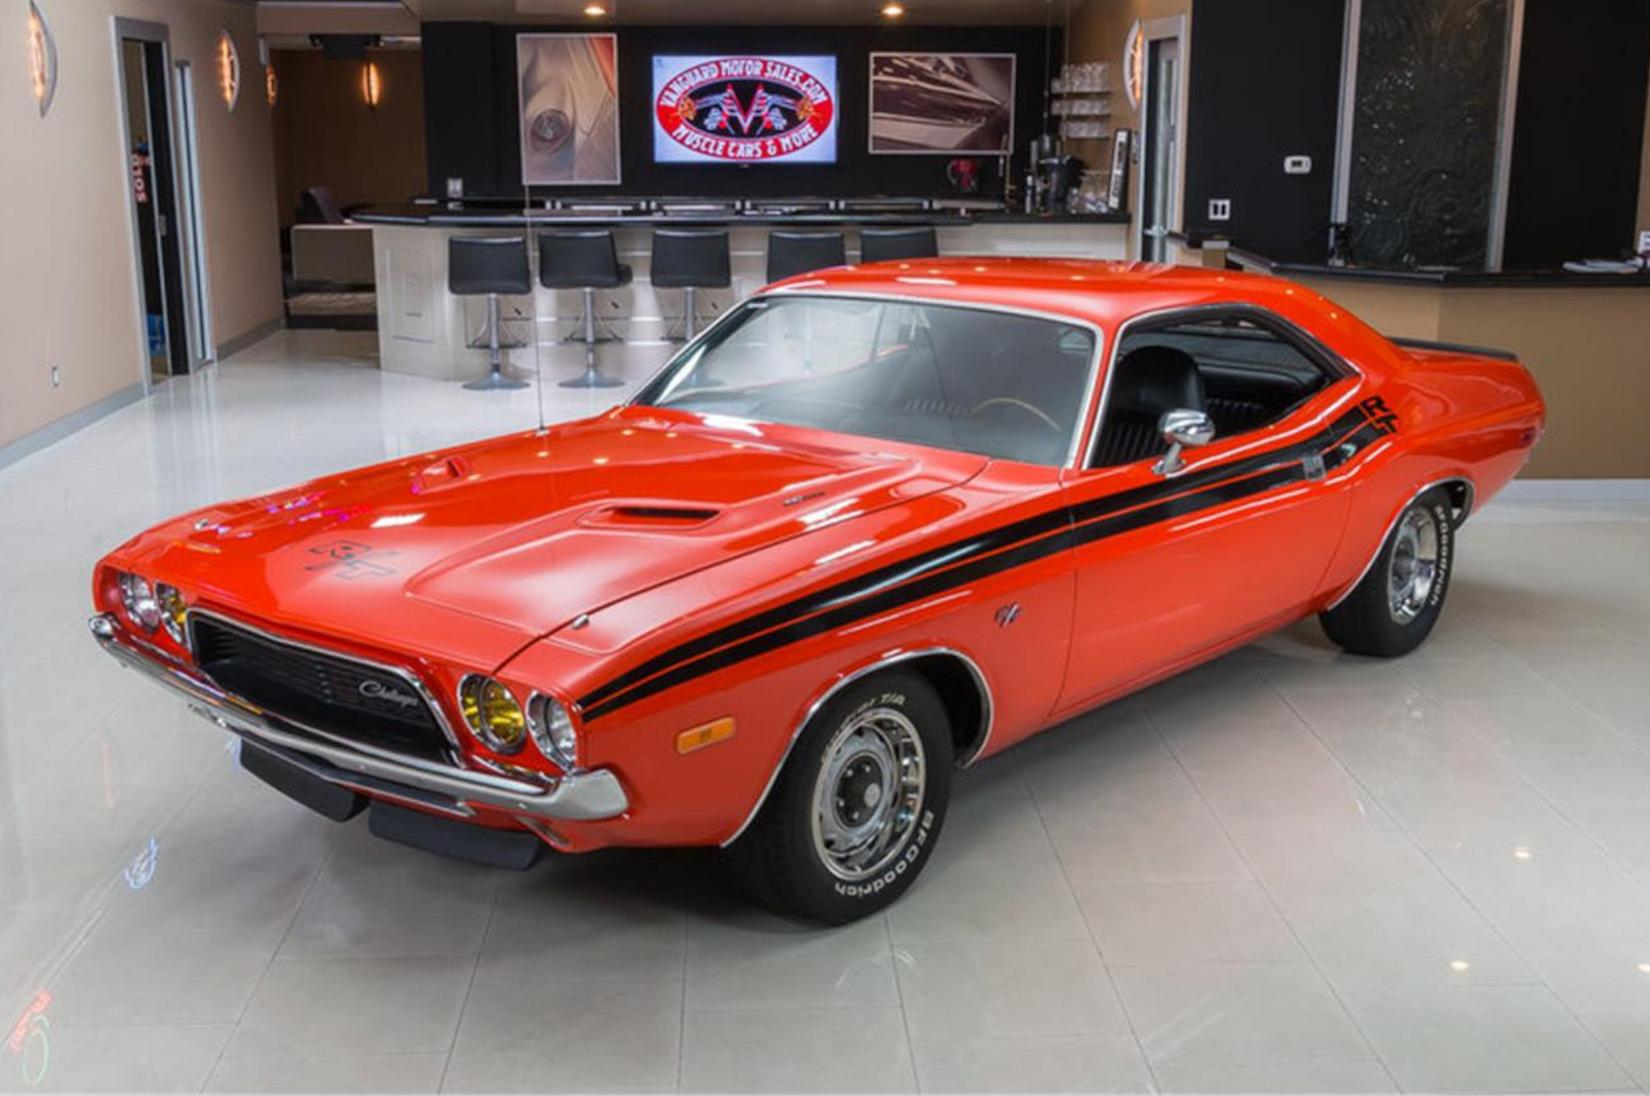 1972 Dodge Challenger in red (R/T clone)